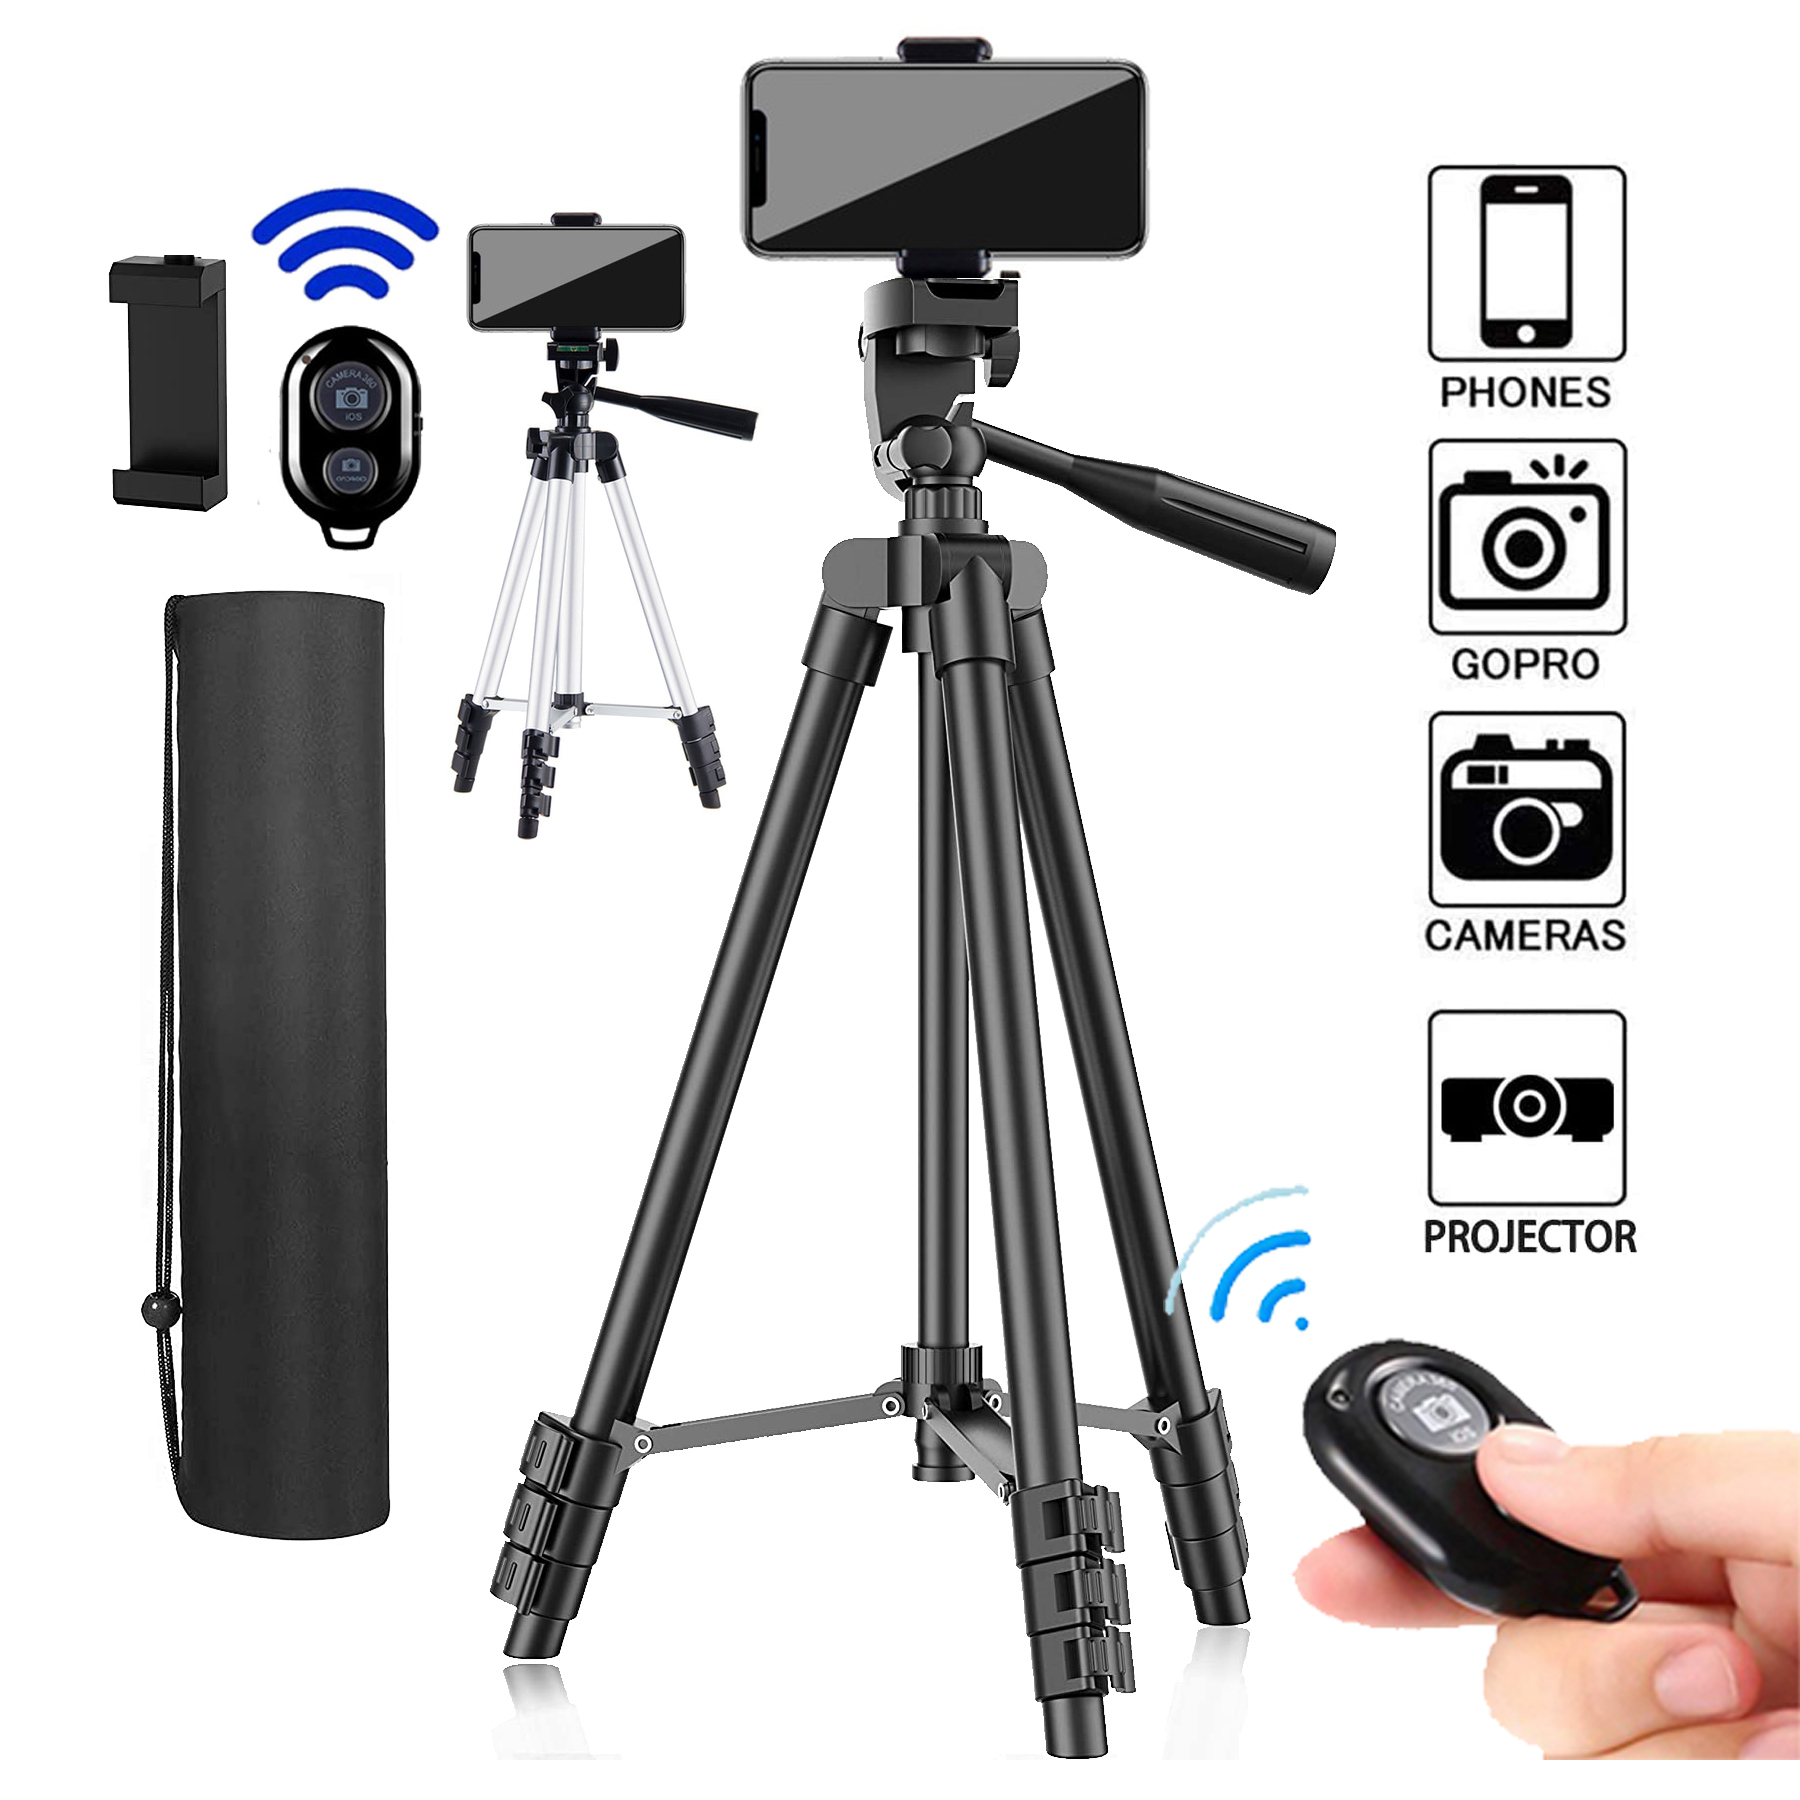 Hands-free Video Viewing Video Call HelloCreate Handheld Tripod Portable Tripod Stand with Phone Clip Stand for Mobile Phones Apply to Live Broadcast 